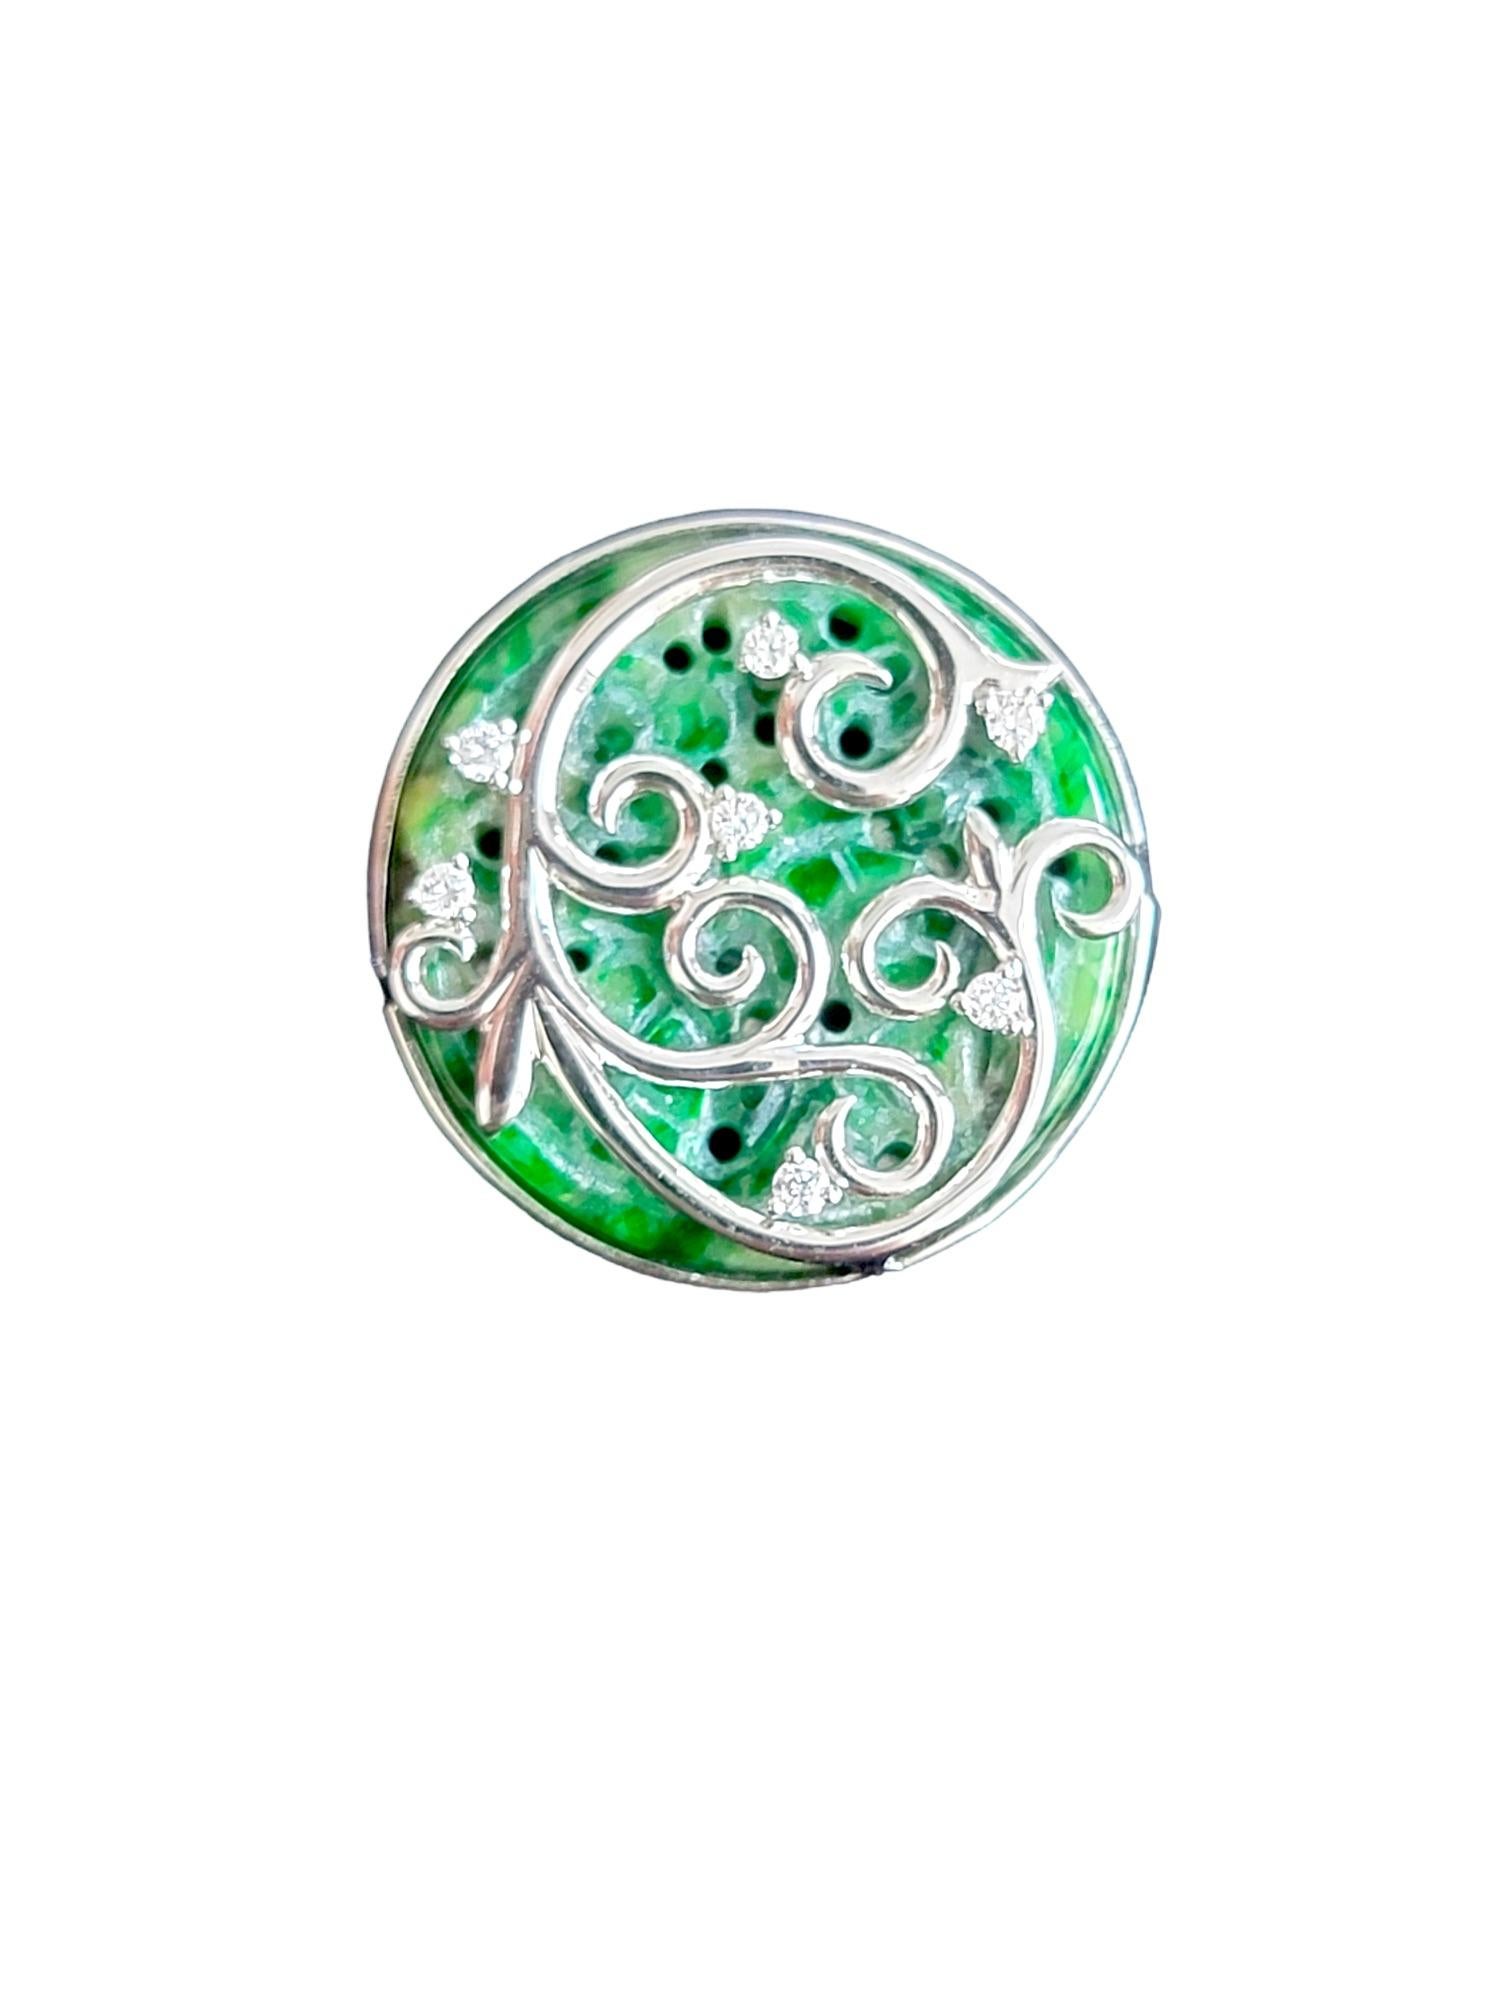 Jade Laboratory Certified Handmade Brooch with Untreated 100% Natural Burmese A-Jade, 18K White Gold, and White Round Brilliant Diamonds. This piece is completely made in Hong Kong.

Wears perfectly on a suit, cocktail dress, or any clothing item